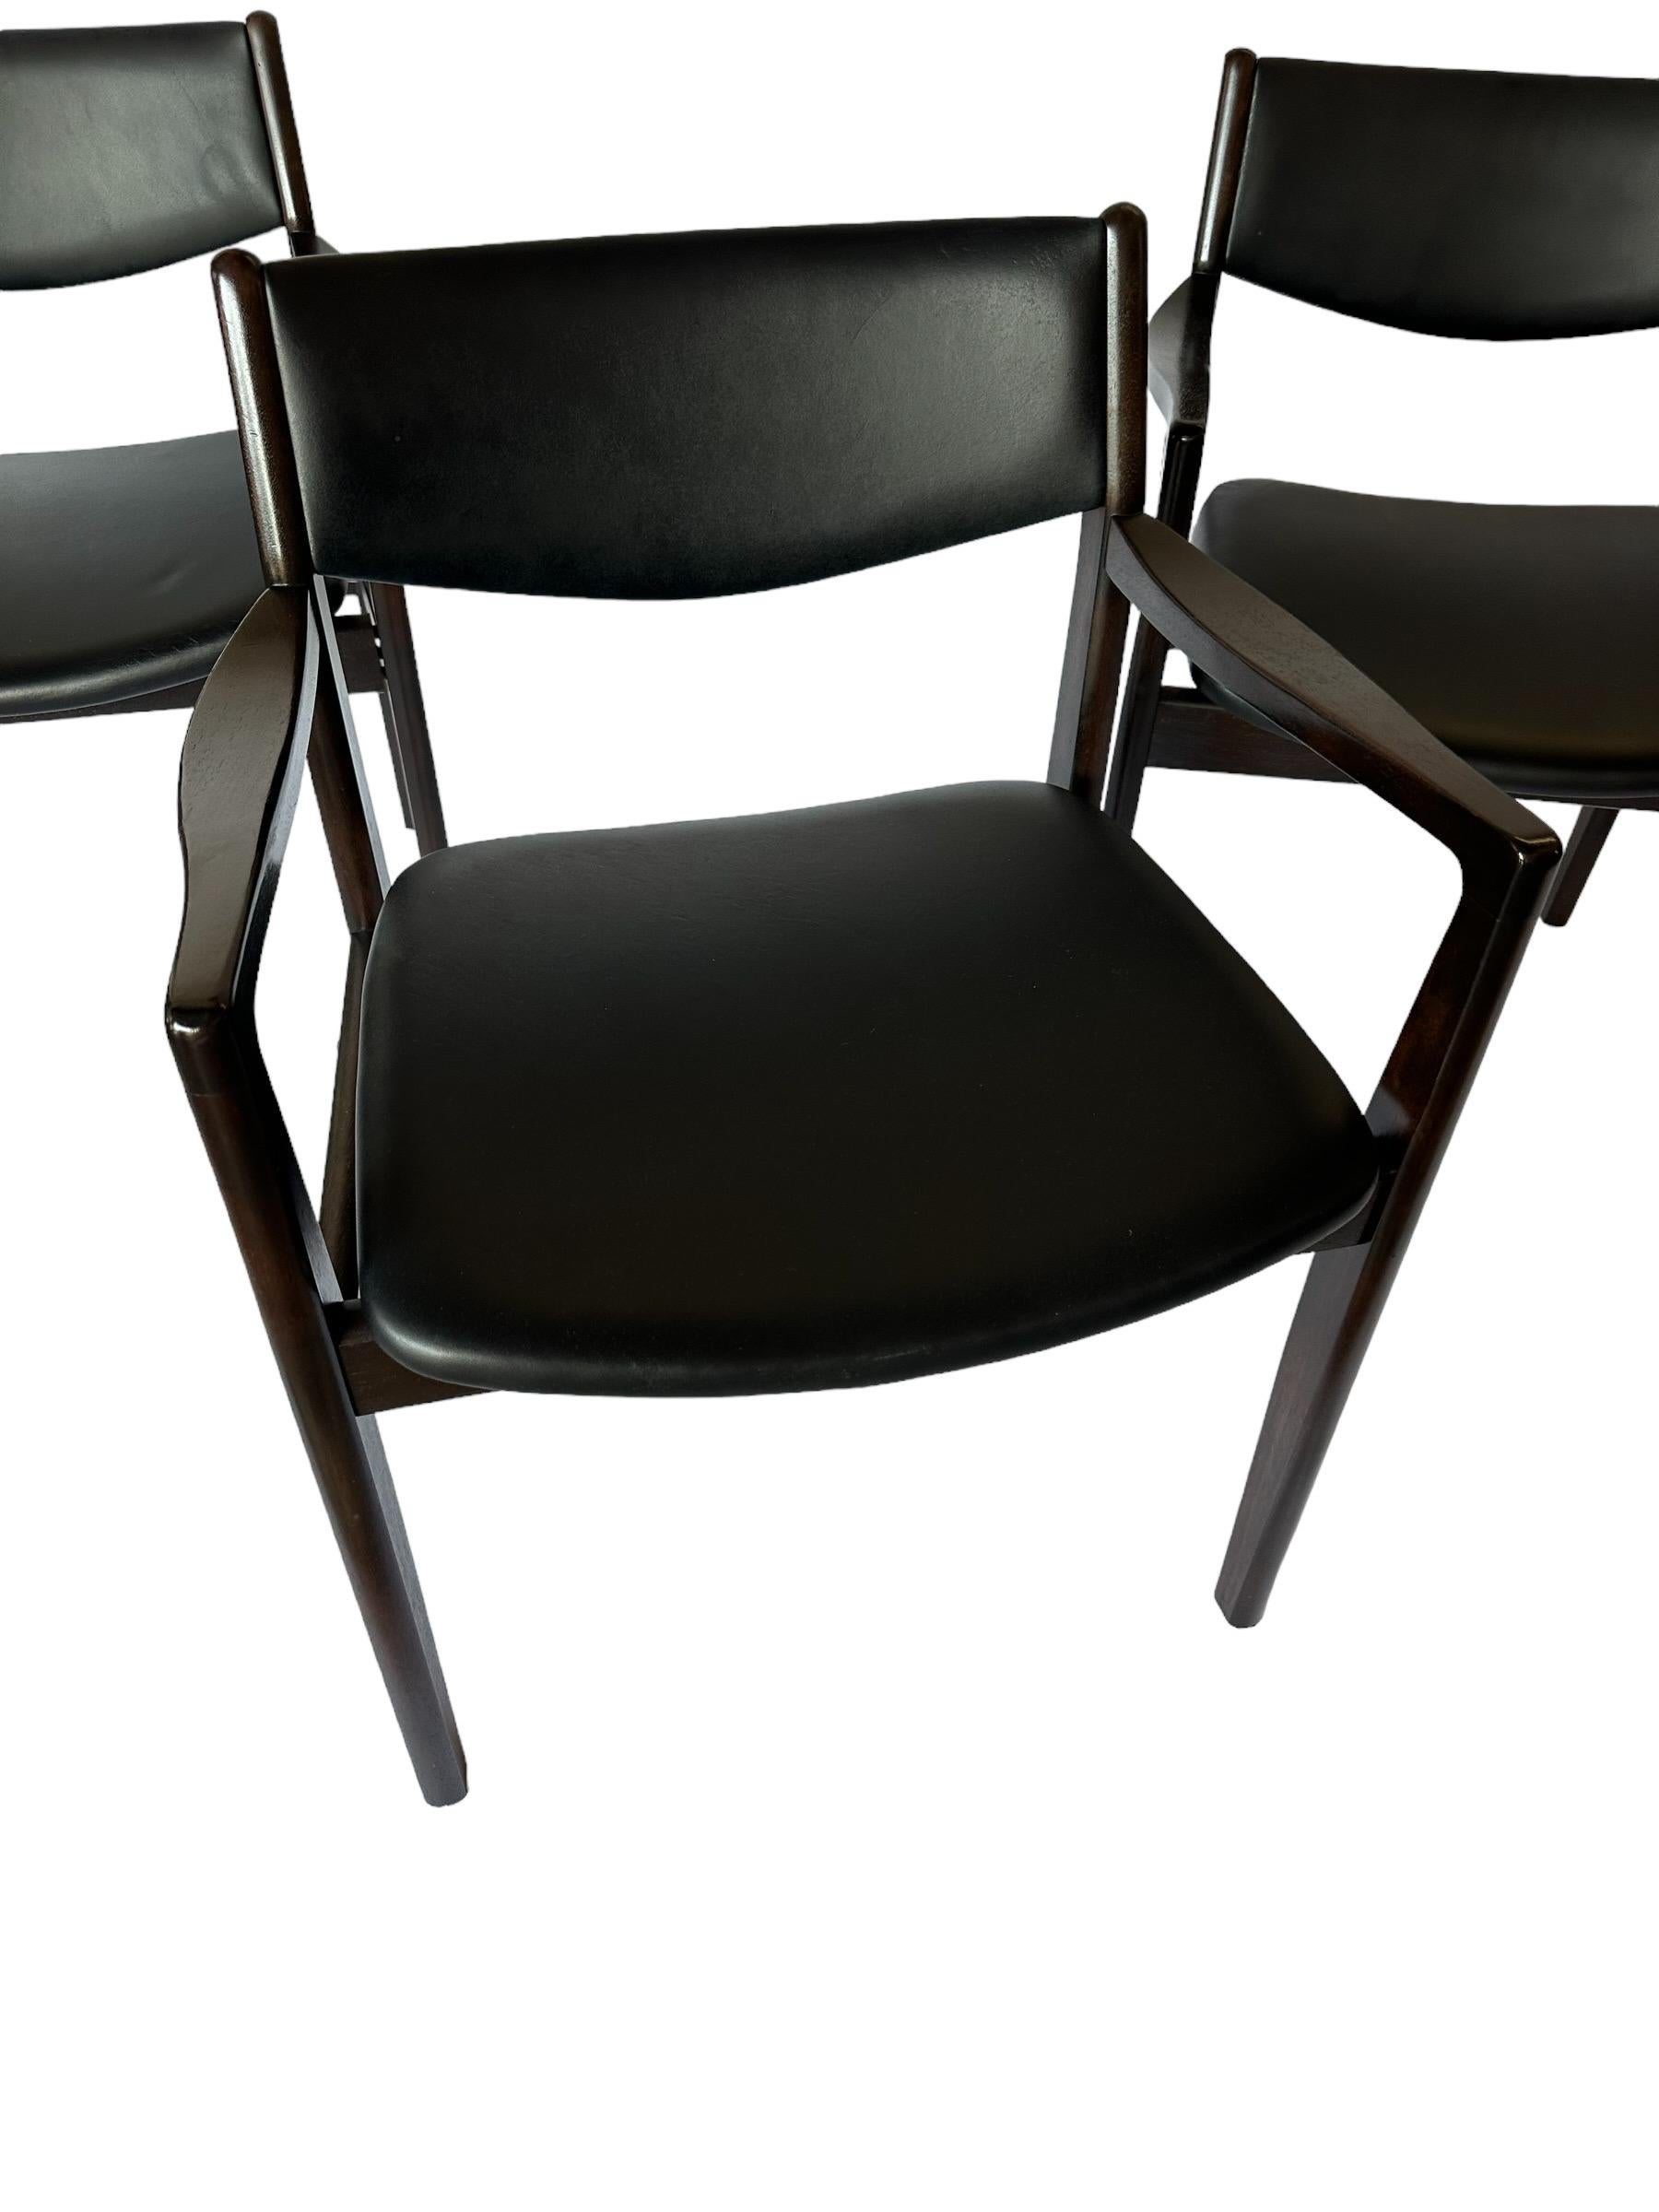 Set of 4 Midcentury Modern Danish Style Hardwood Dining Chairs For Sale 2